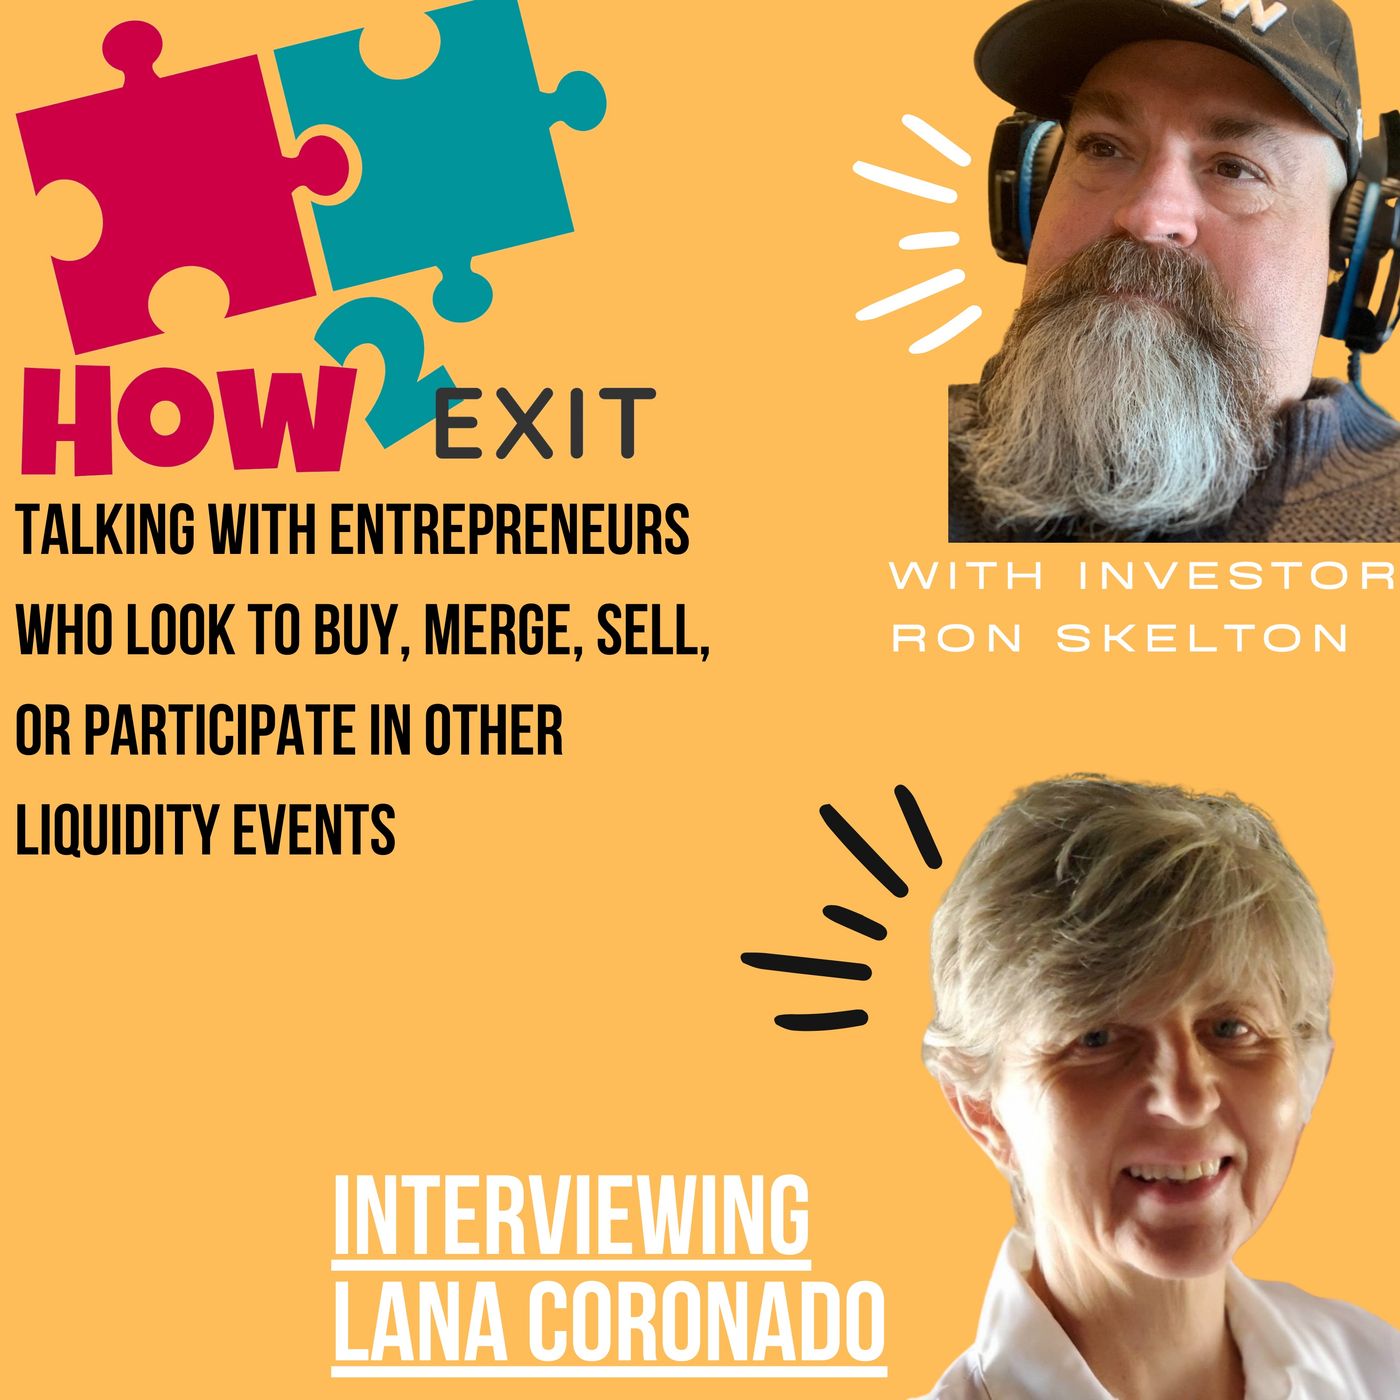 How2Exit Episode 1: Lana Coronado - Author and Chair for MBH who have acquired 25 companies in less than 2 years.